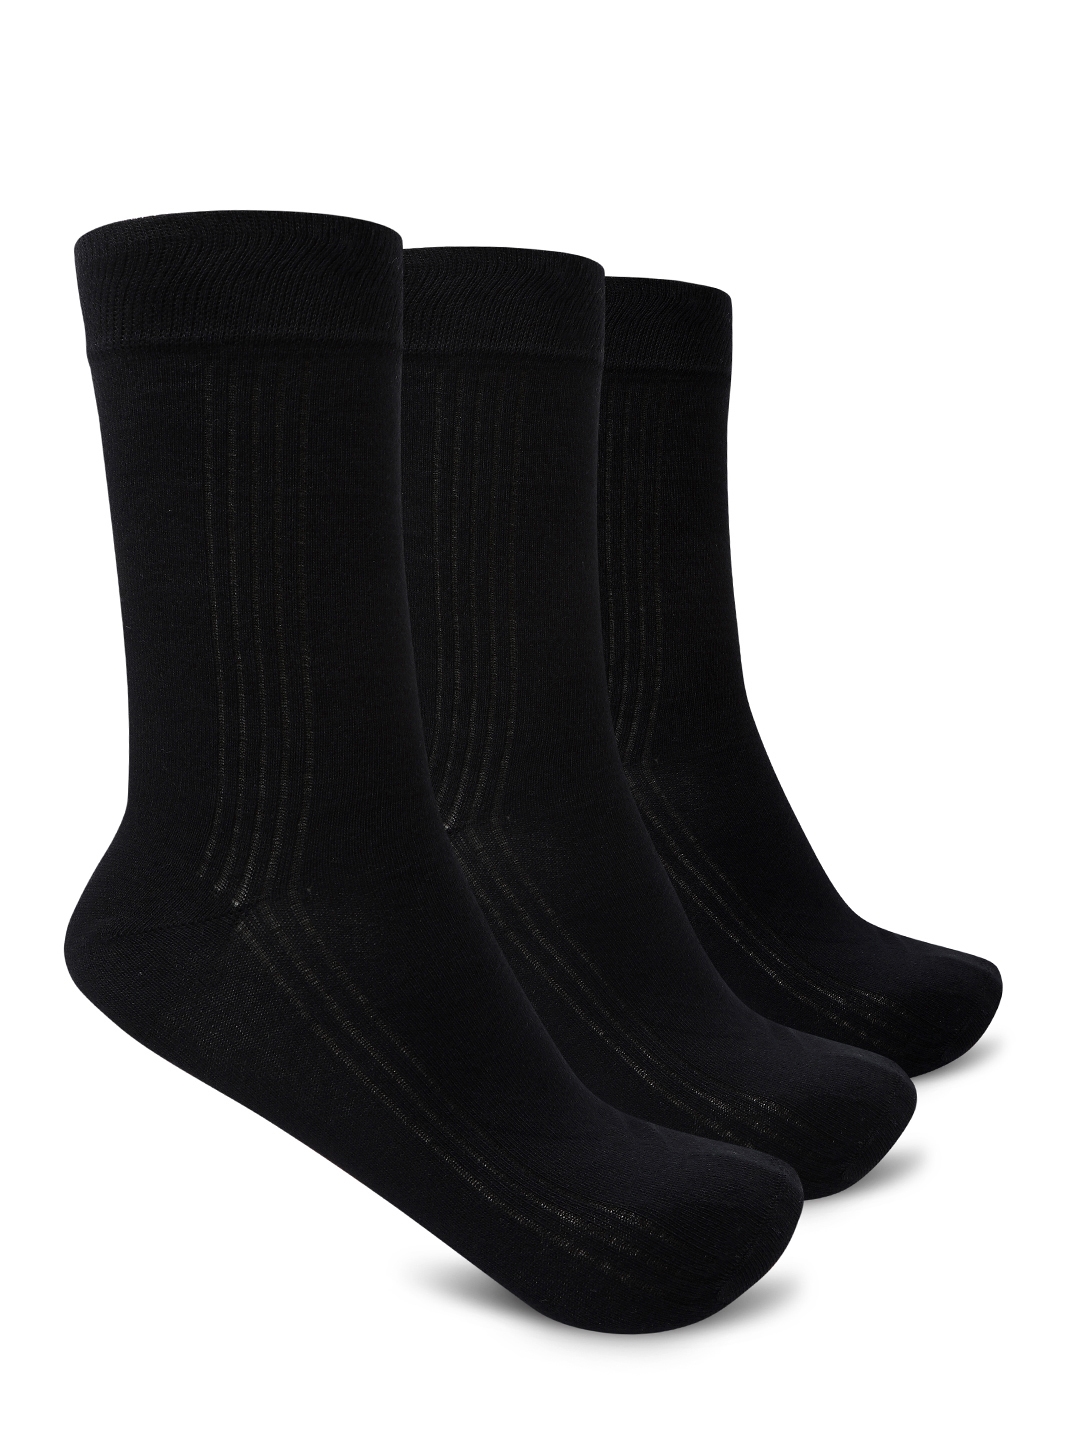 Smarty Pants | Smarty Pants men's pack of 3 solid cotton socks. 